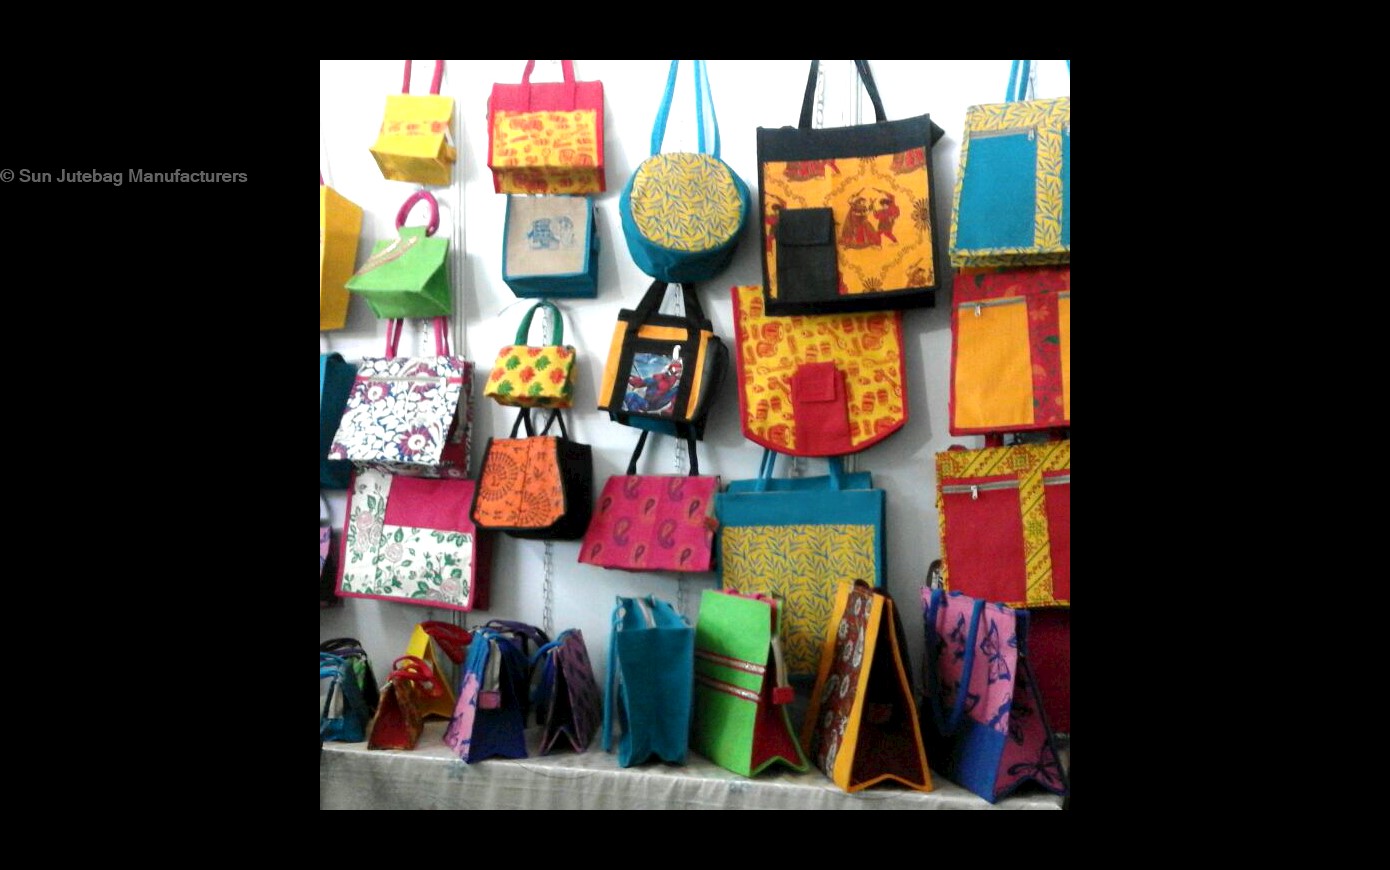 Best jute bags manufacturers in delhi NCR and india  Double R Bags